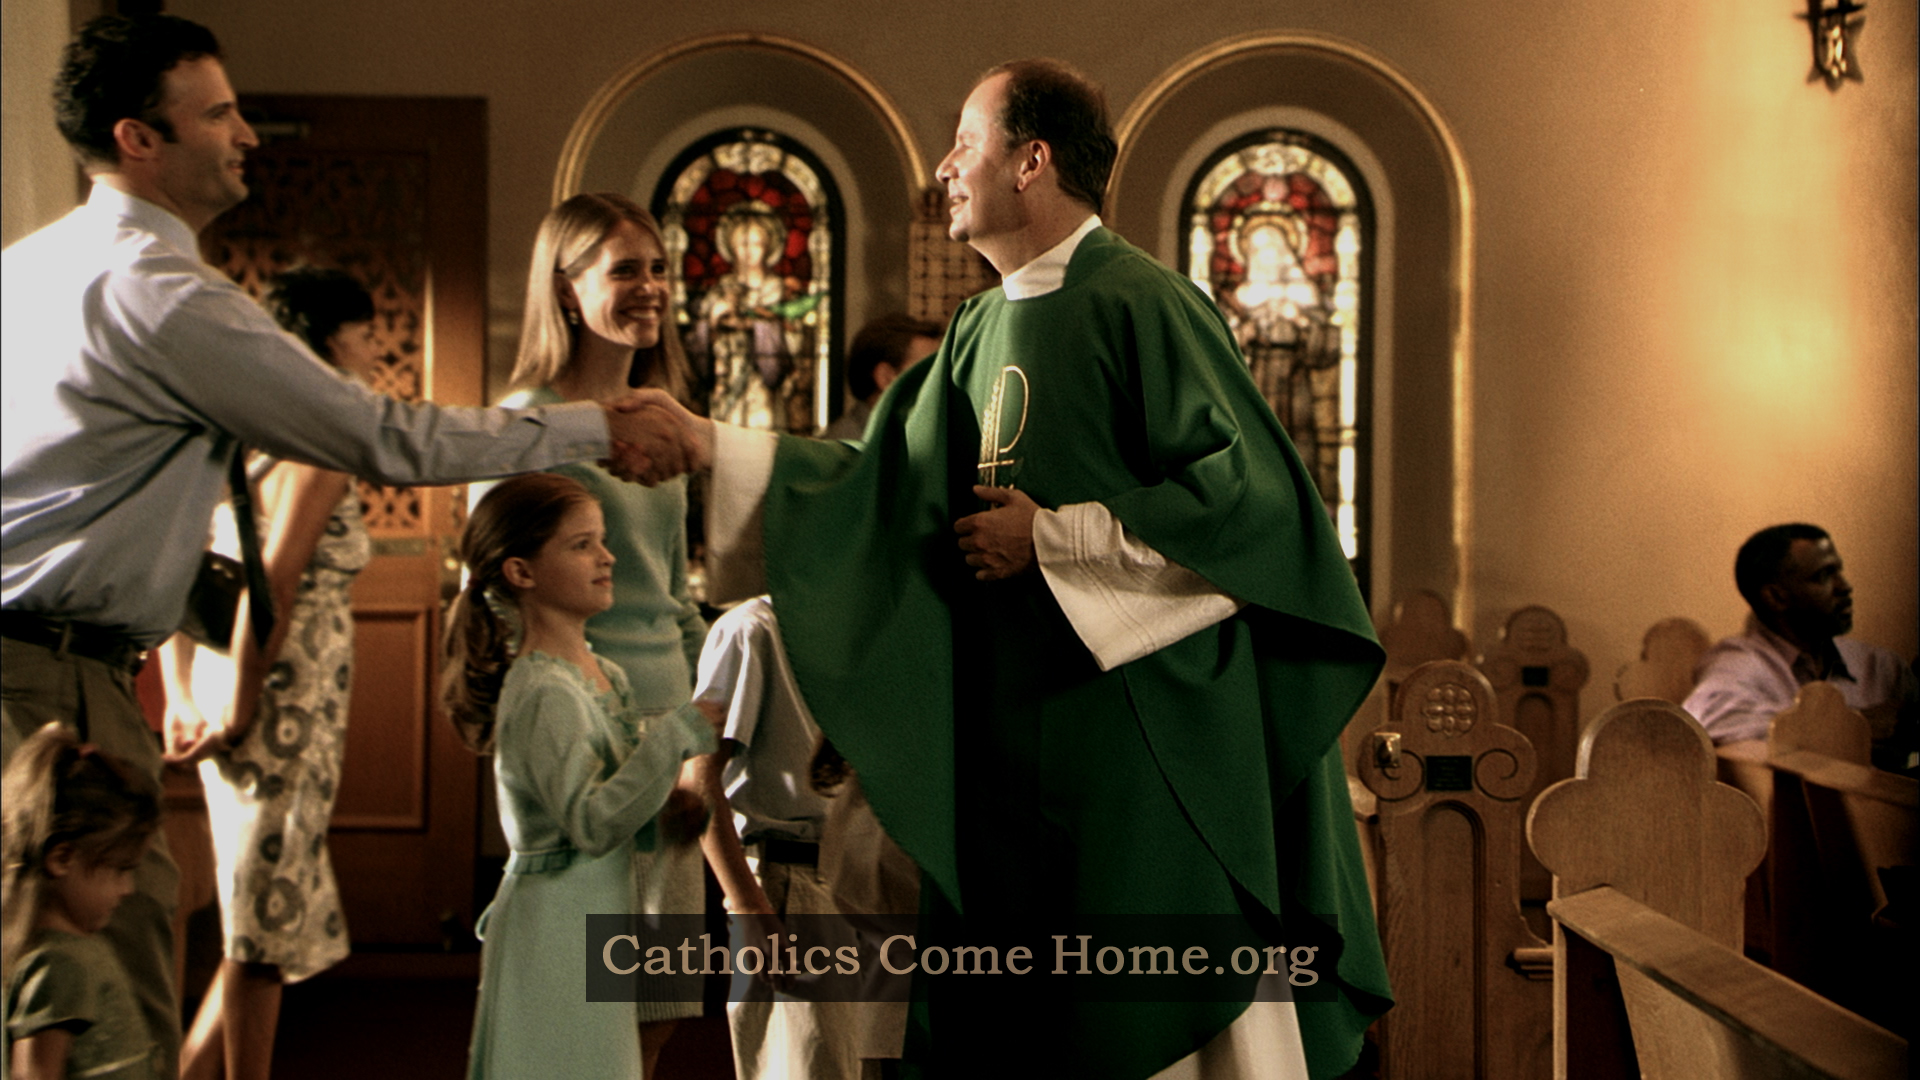 A scene from the "Epic" commercial by Catholics Come Home. (CatholicsComeHome.org)